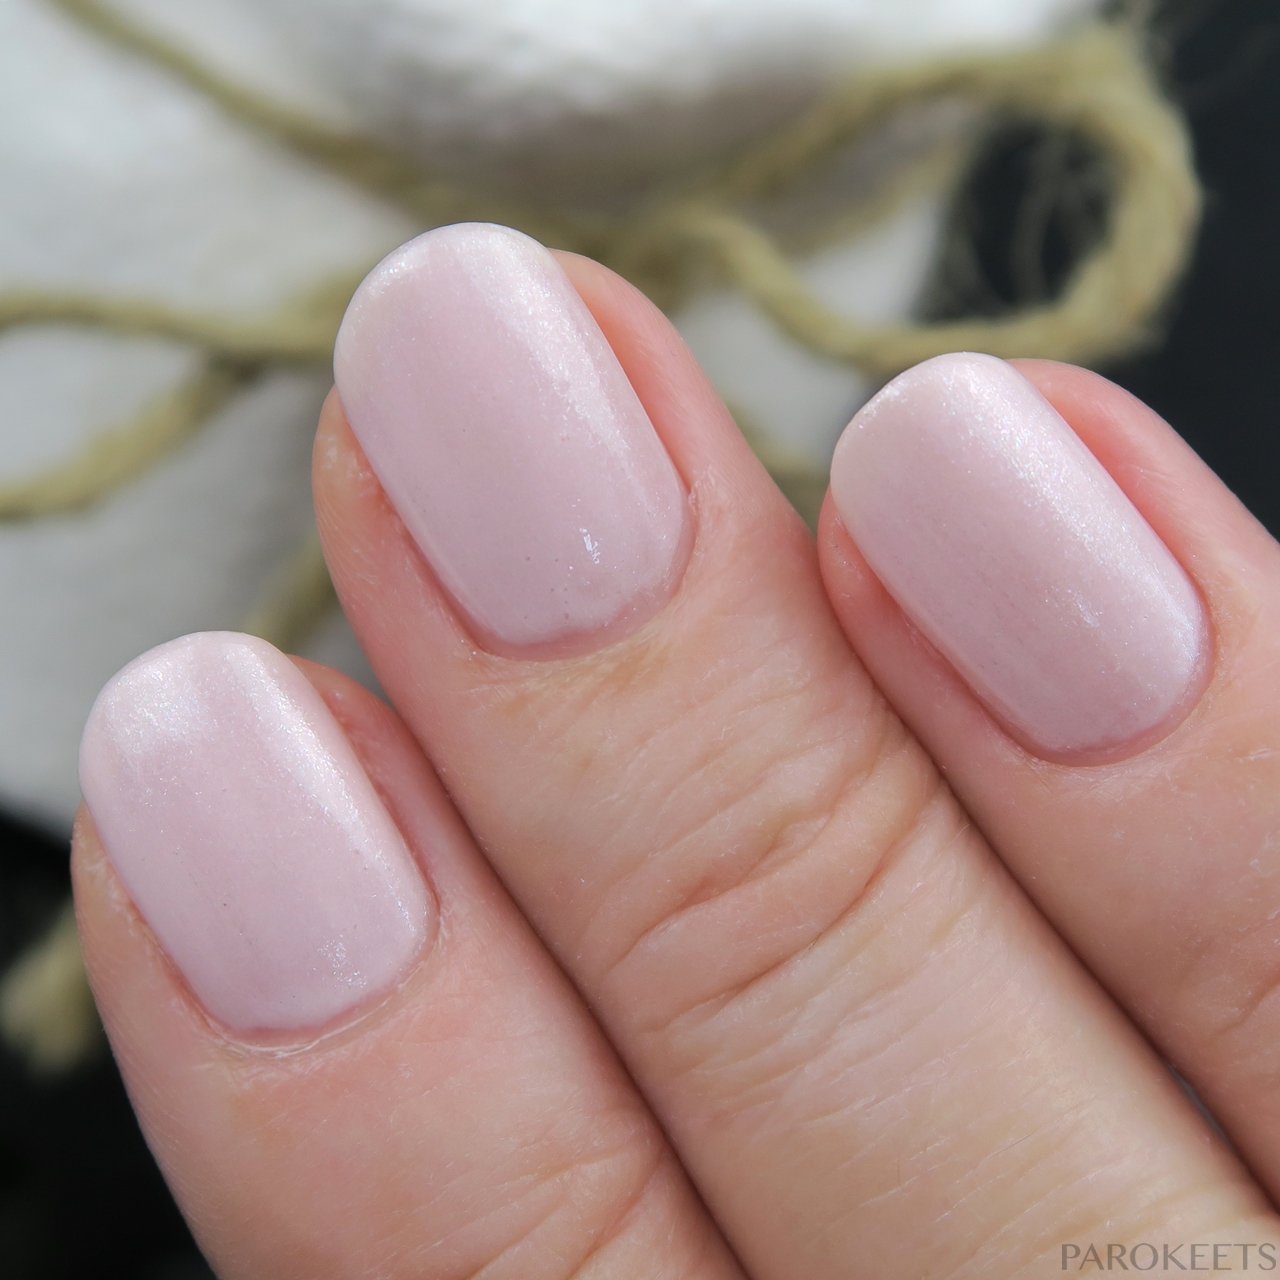 REVIEW: Avon True Color Multi Benefit BB Nail Enamel / Reflection of Sanity